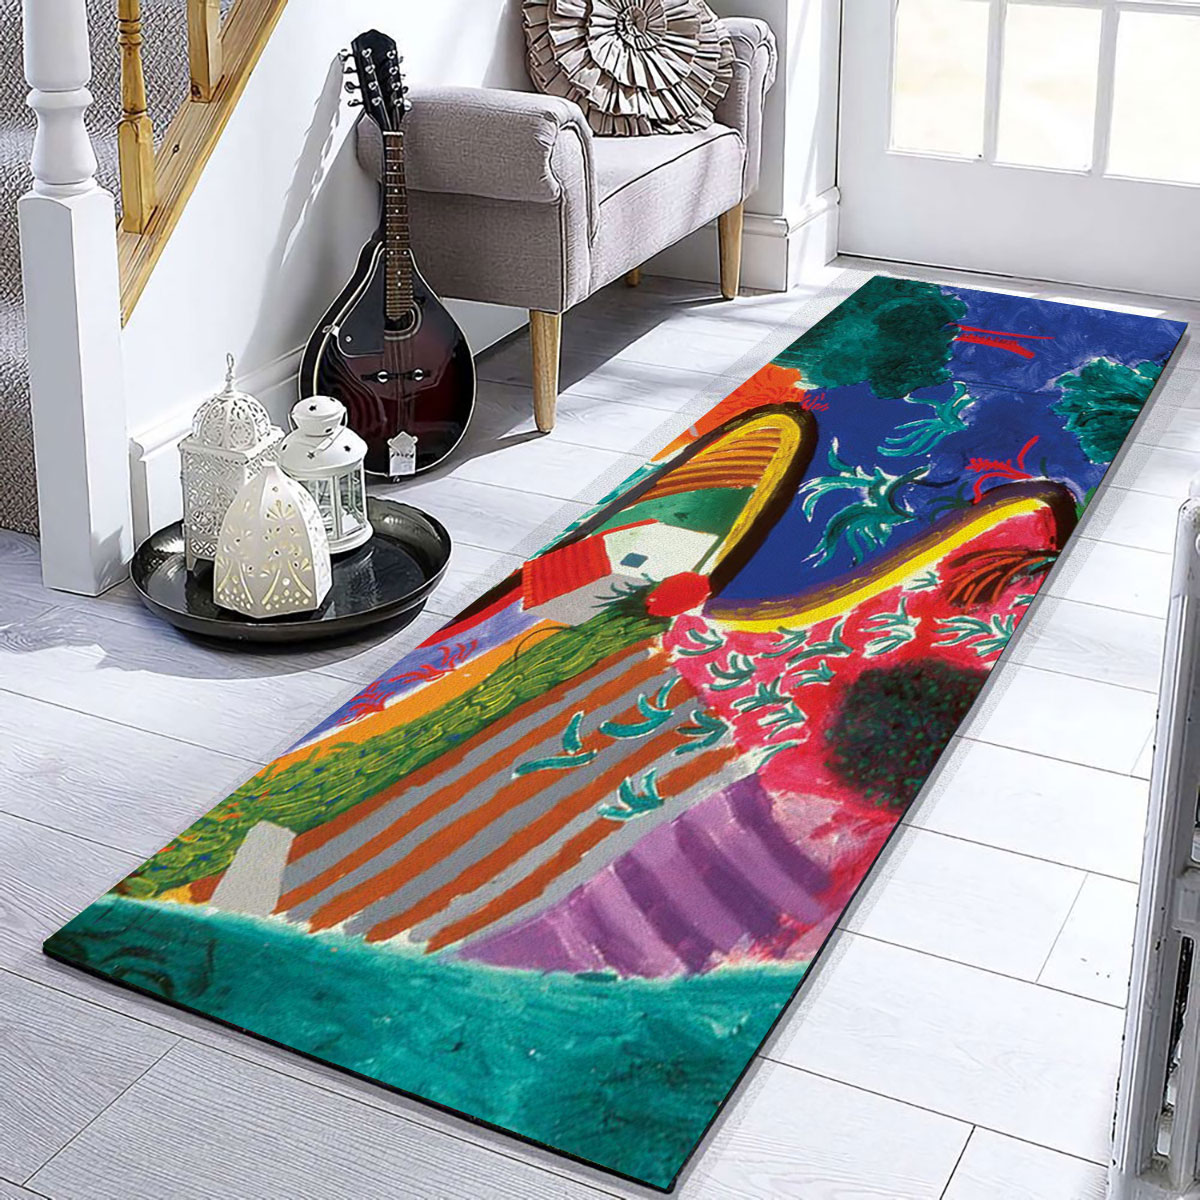 Colorful Canyon Runner Carpet